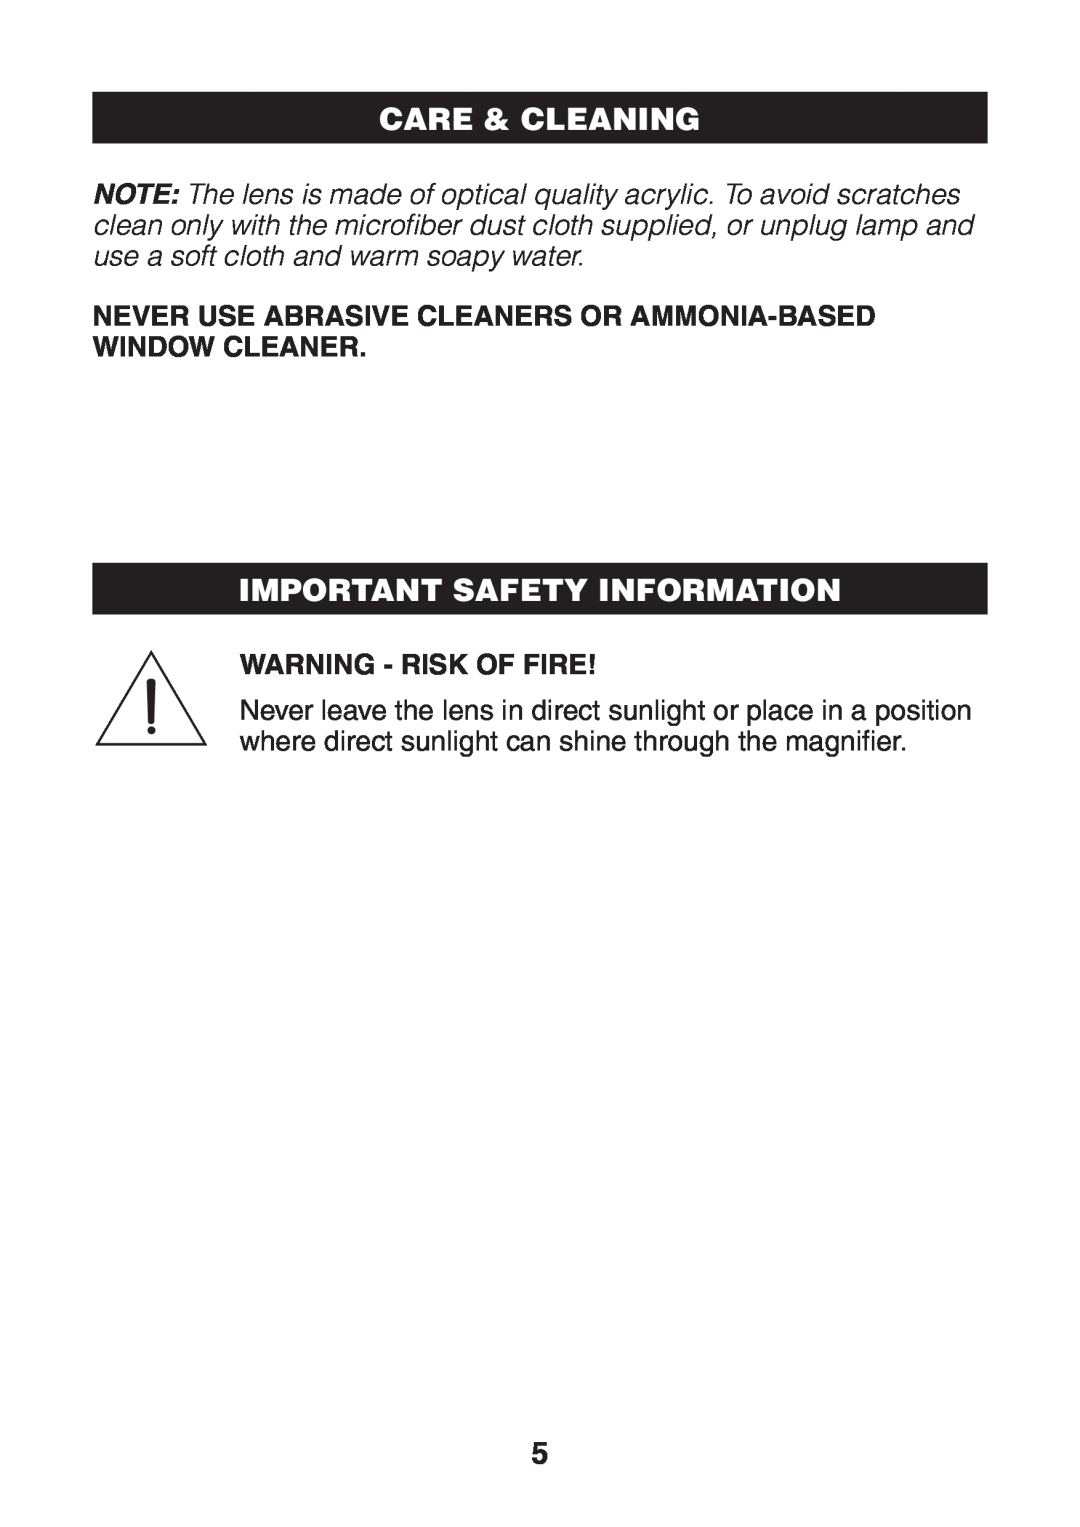 Verilux VM01 manual Care & Cleaning, Important Safety Information, Warning - Risk Of Fire 